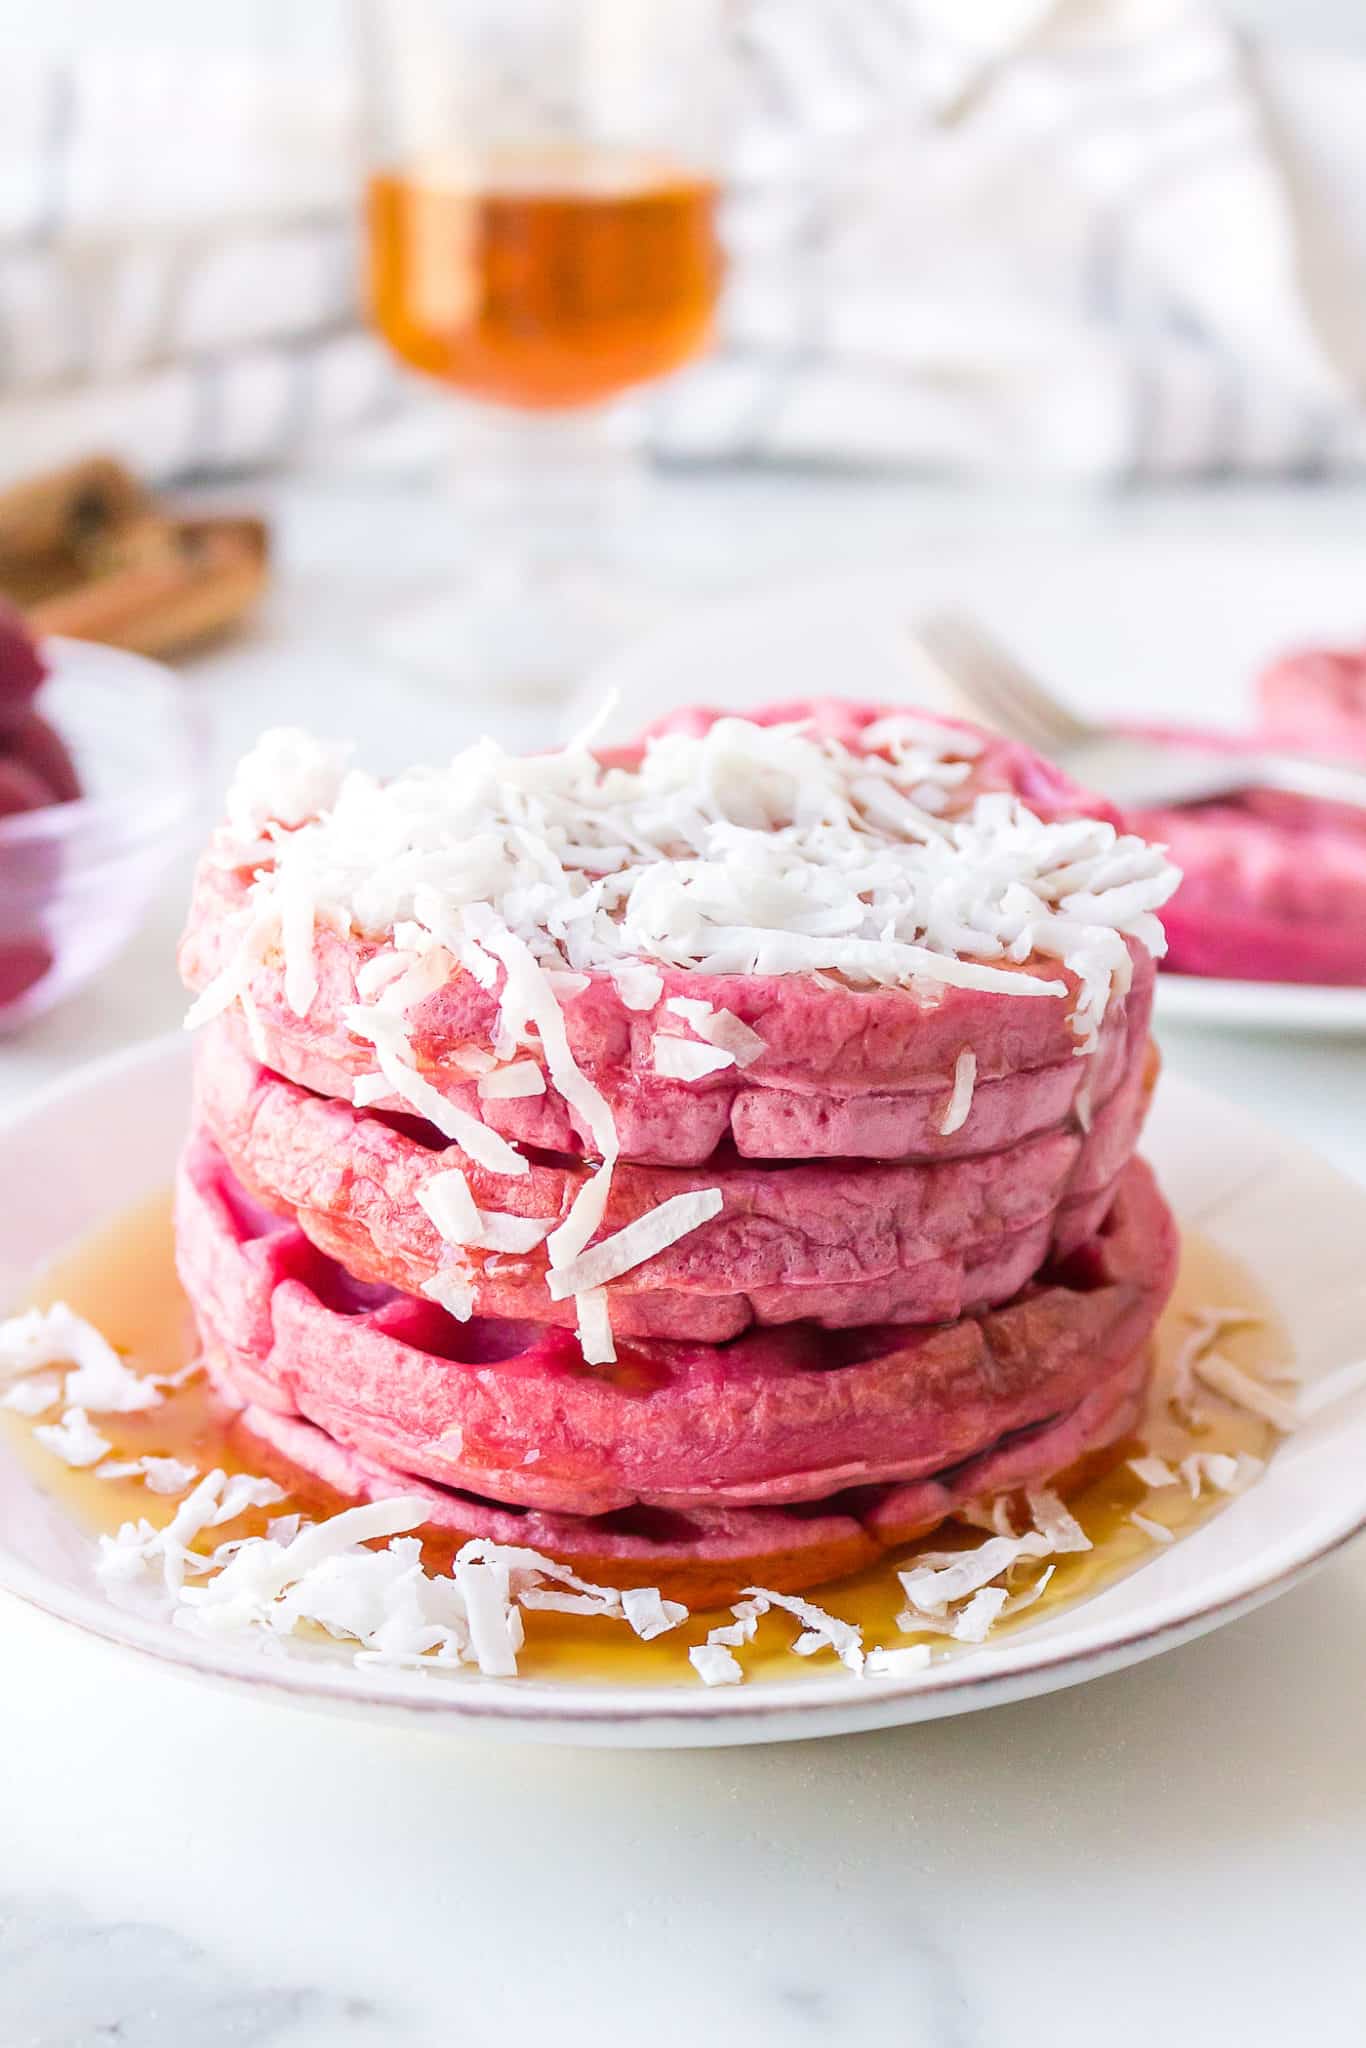 Shredded coconut and maple syrup on a stack of pink waffles on a plate.